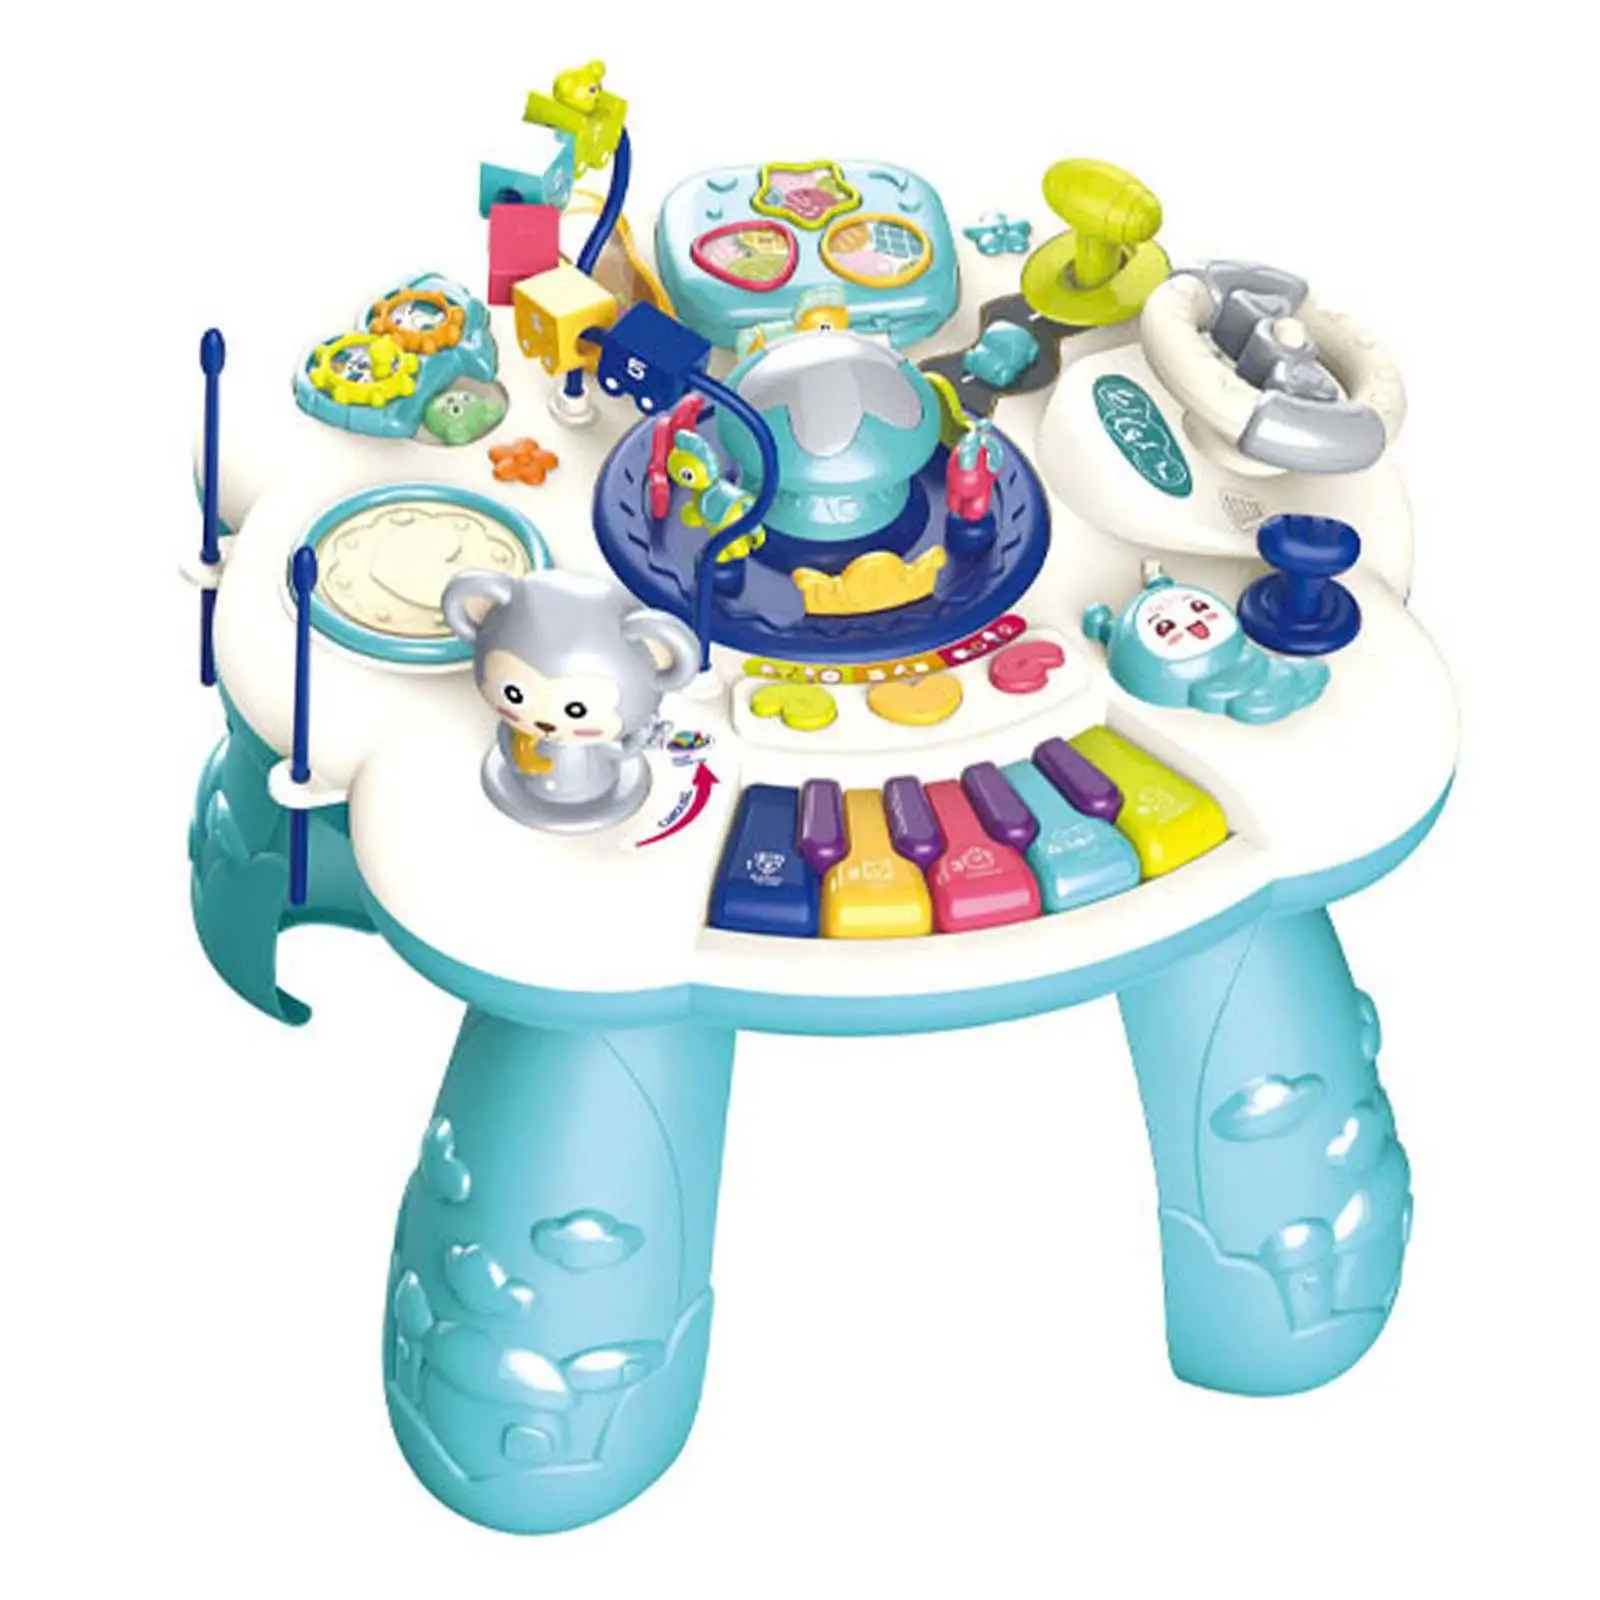 Musical Learning Activity Table Early Development Cute for Toddlers Birthday